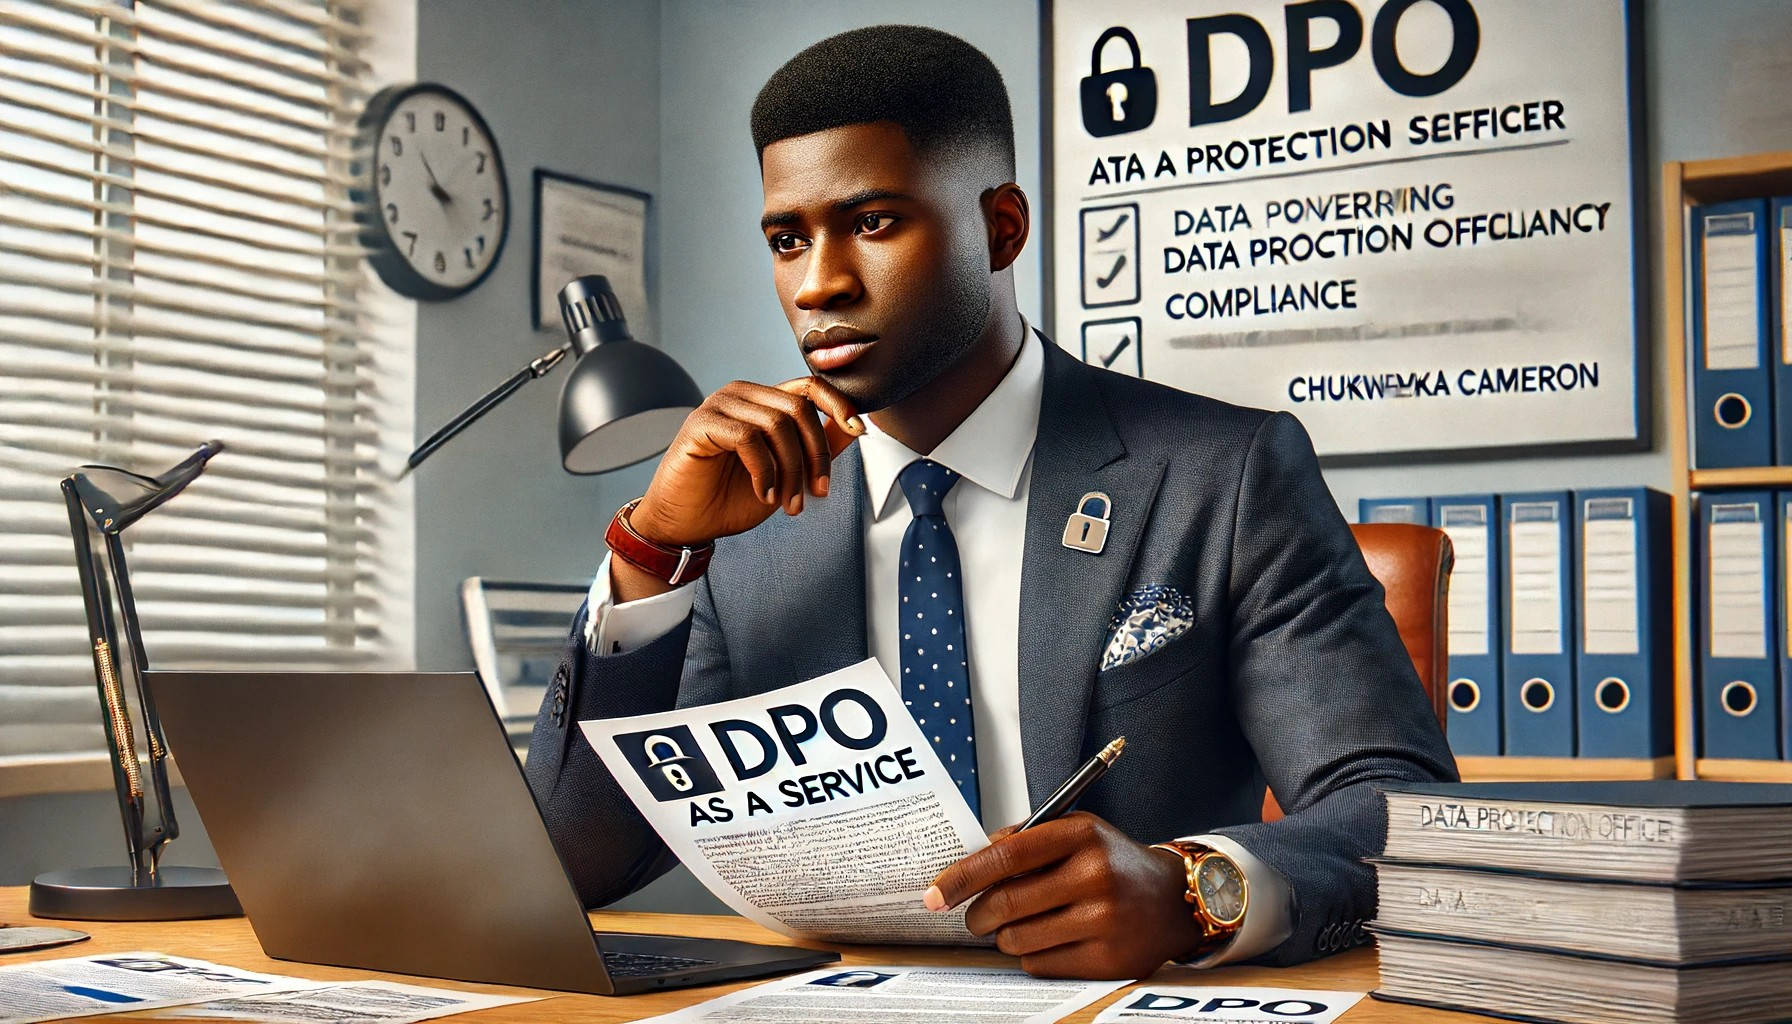 DPO in a professional office setting, reviewing documents on data protection compliance with a laptop and paperwork on the desk. A 'DPO as a Service' sign emphasizes the importance of a Data Protection Officer in overseeing data protection compliance.